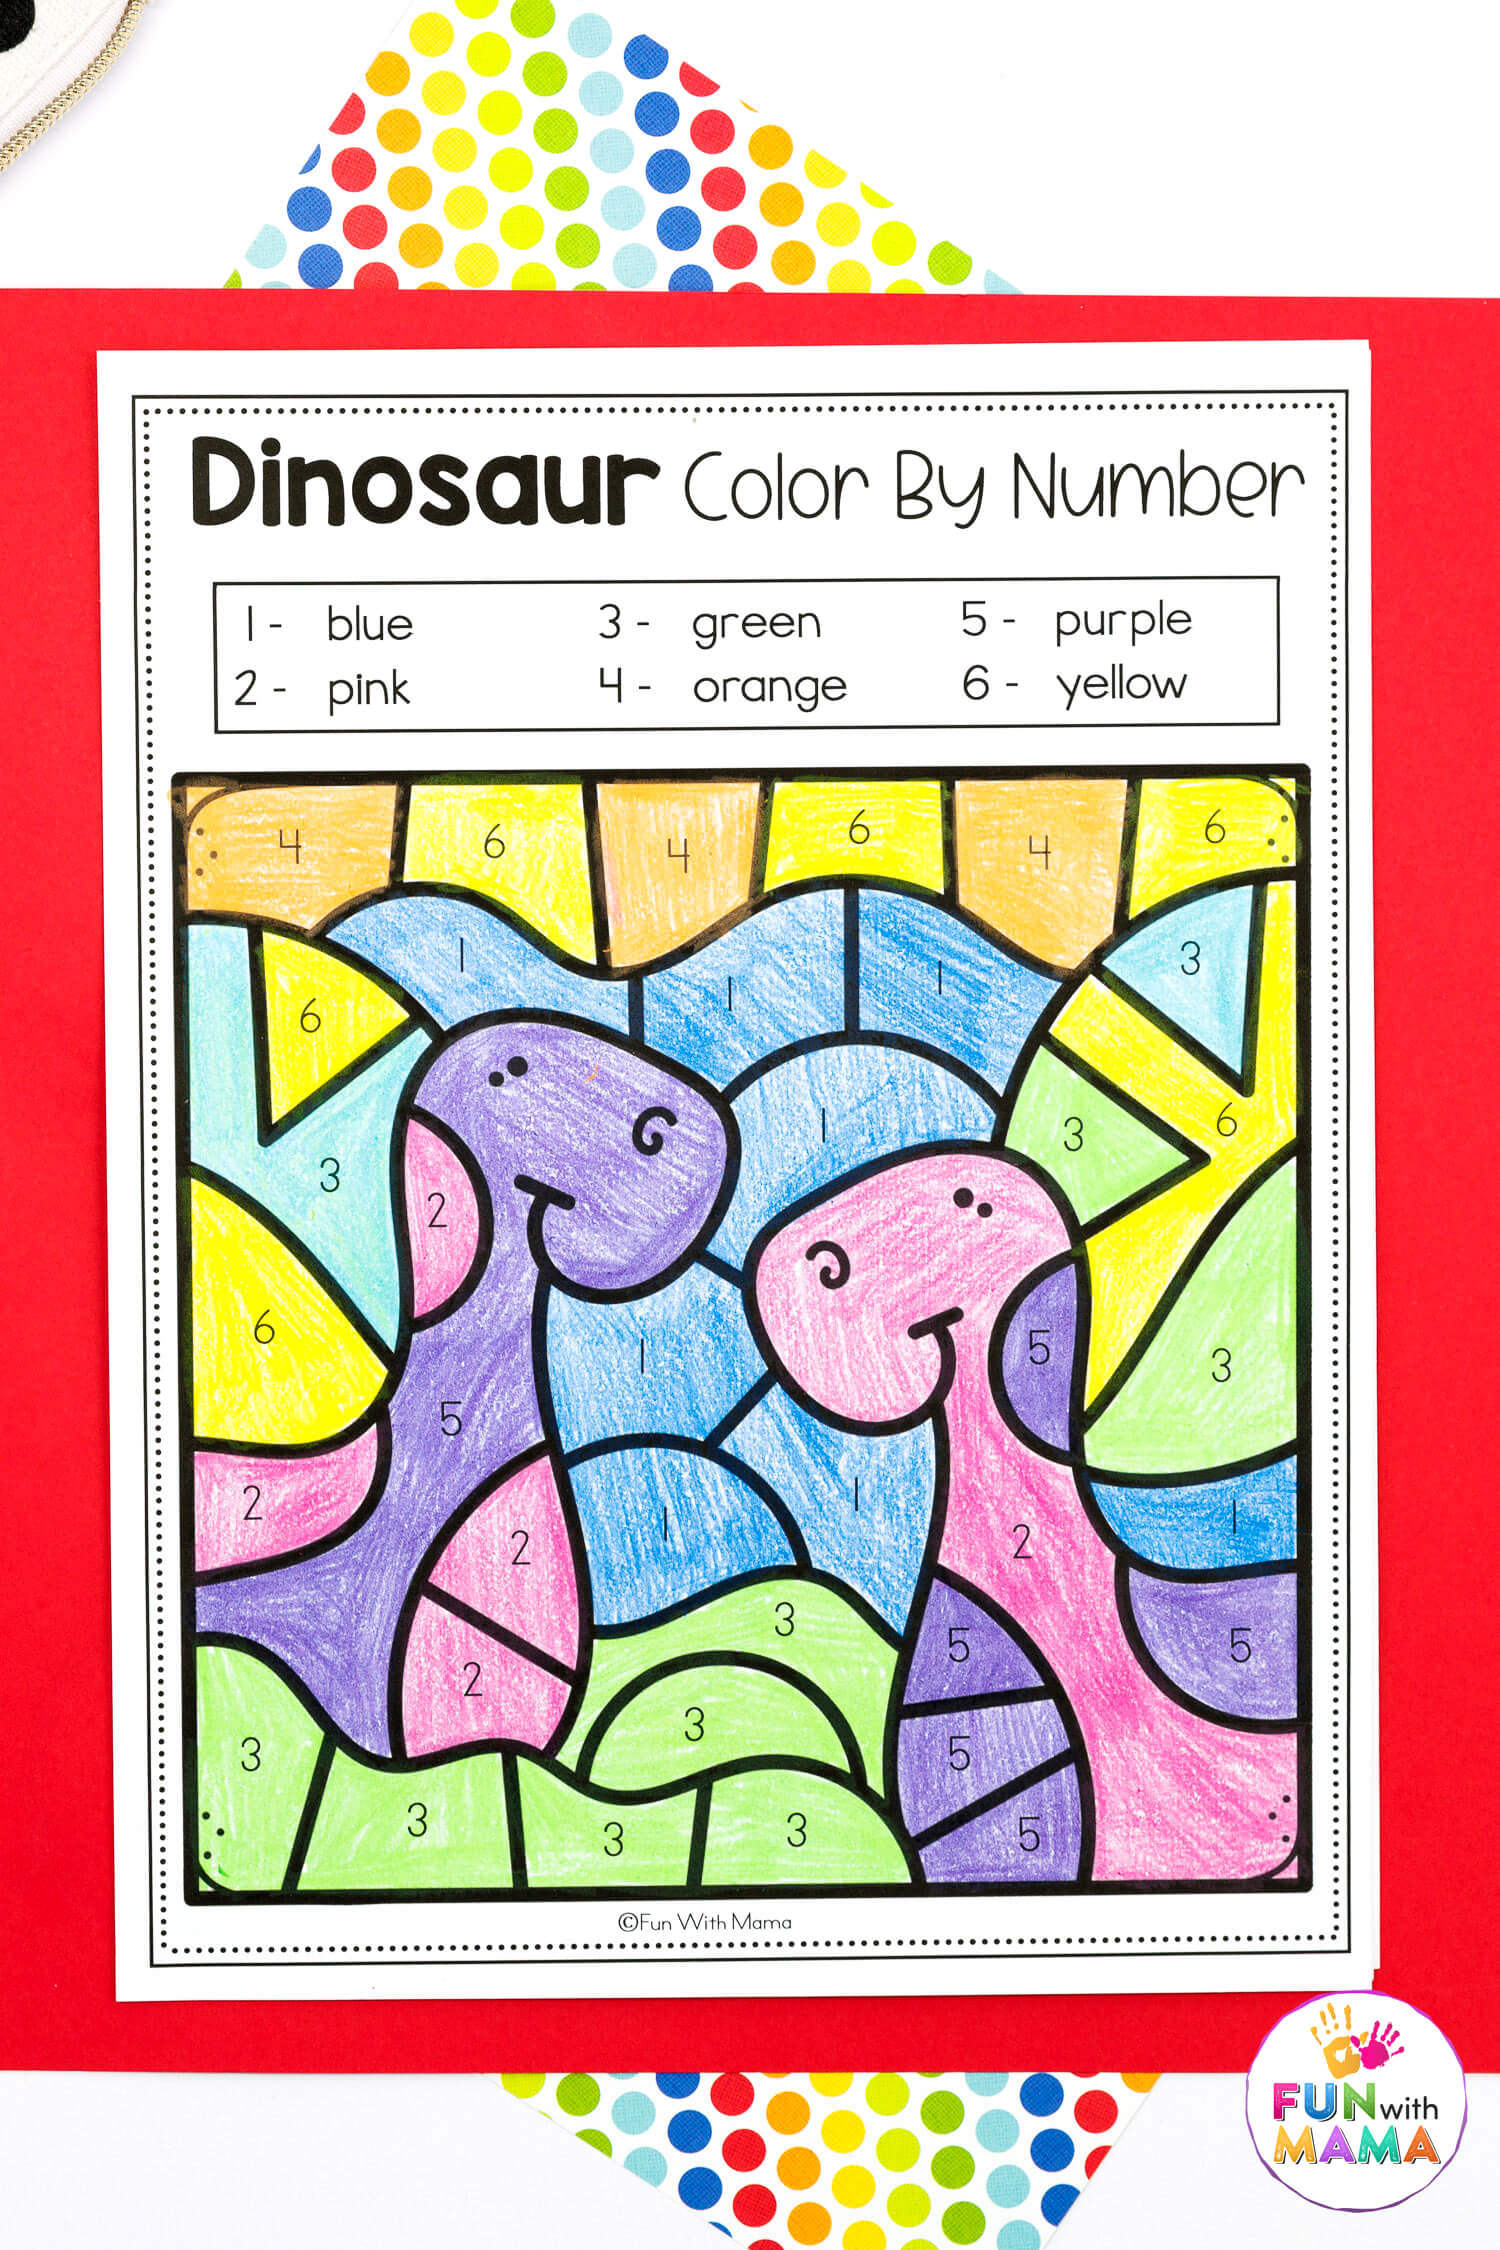 2 t-rex dinosaurs colored in wth 6 different pencil colors